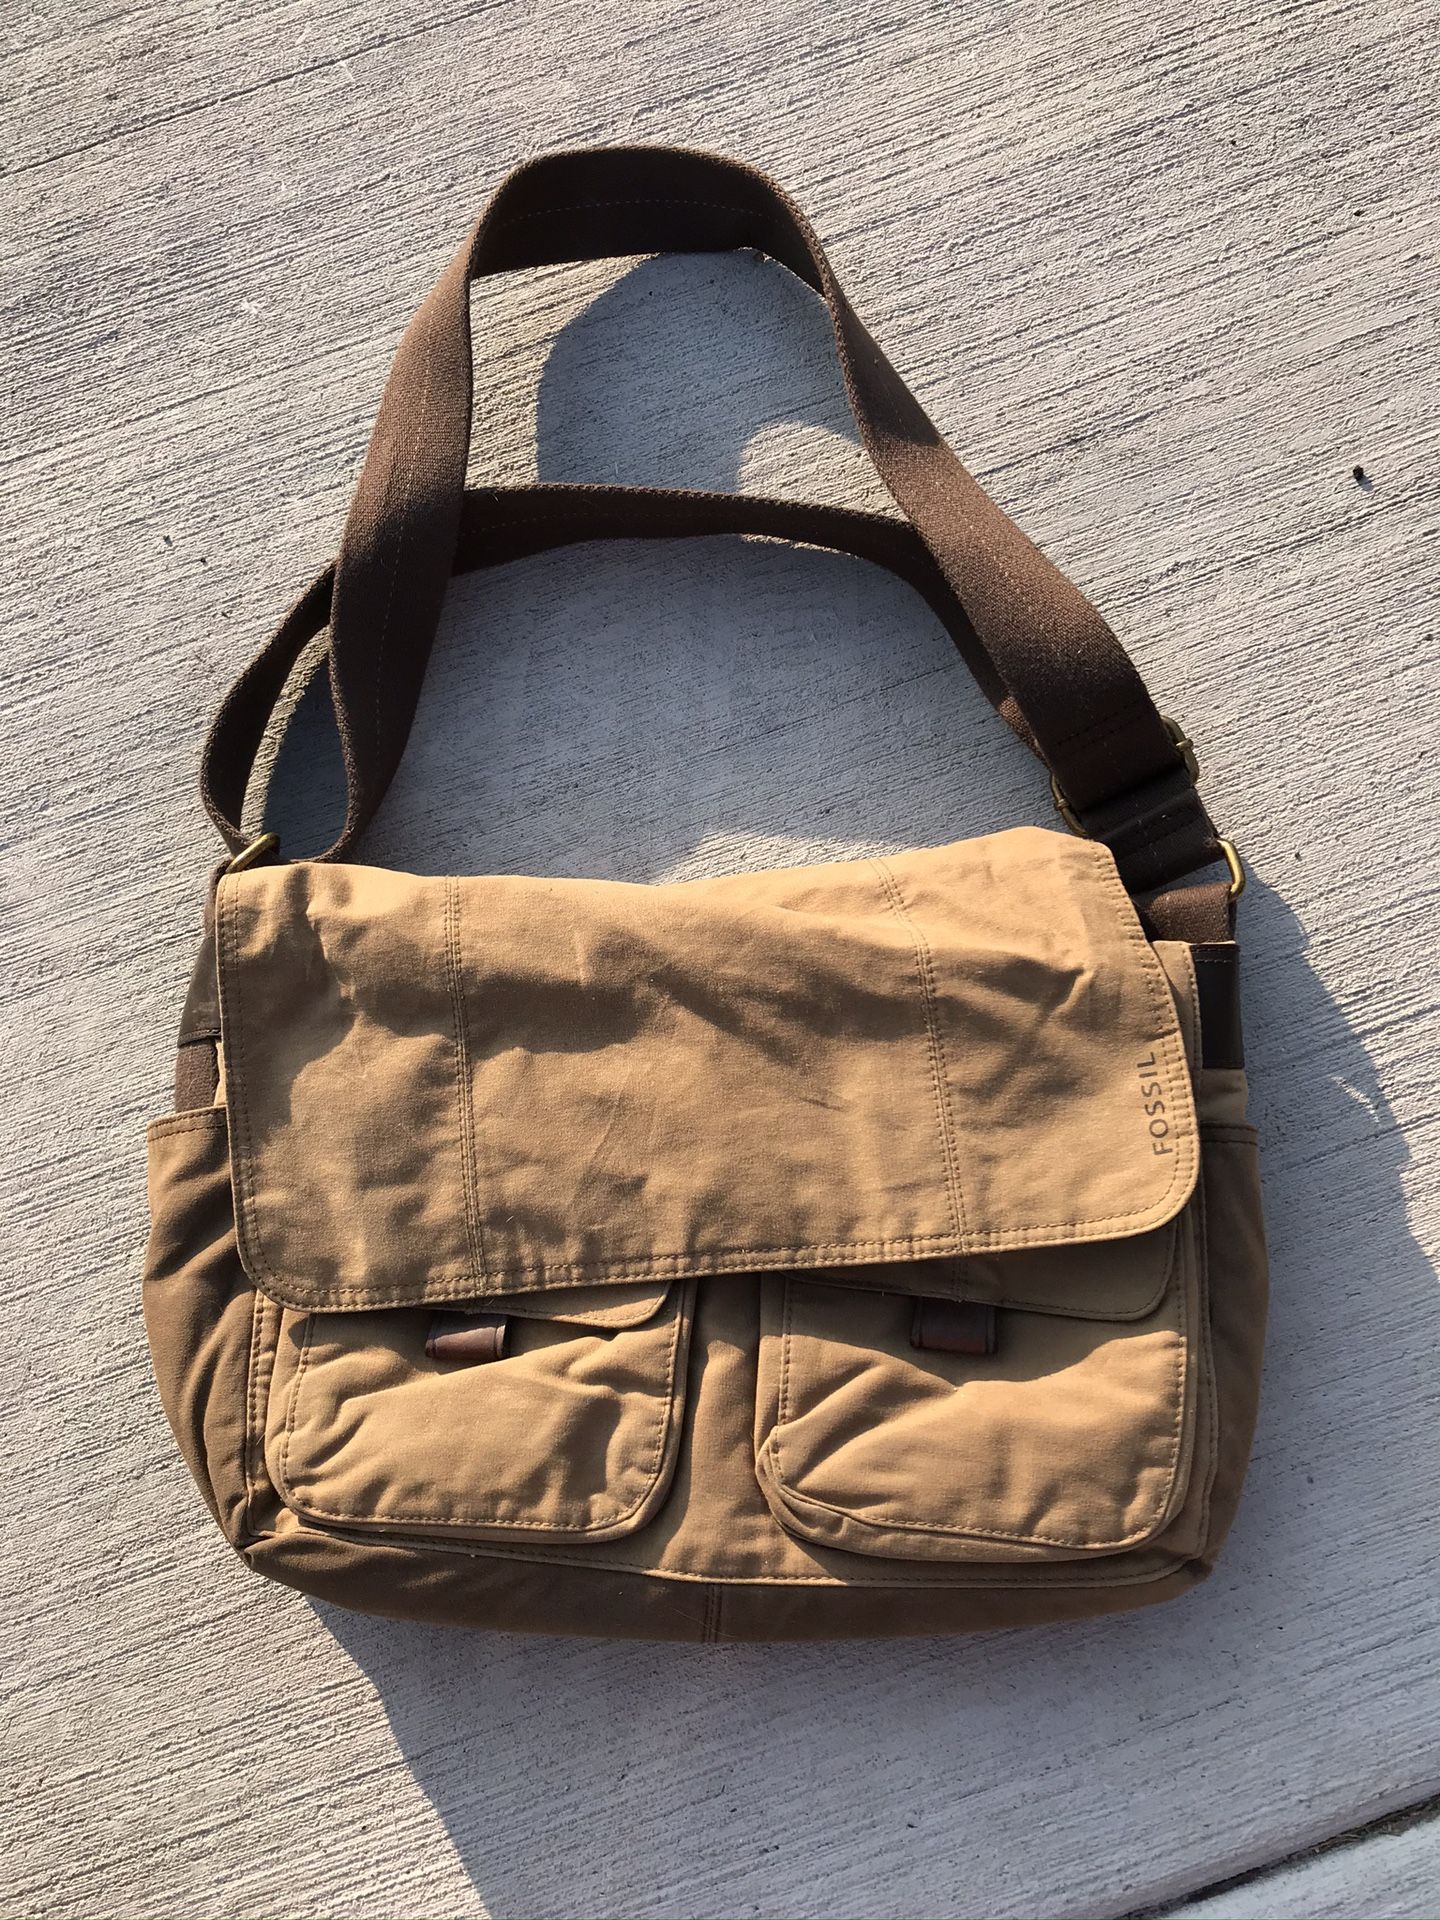 Authentic Fossil Messenger Bag